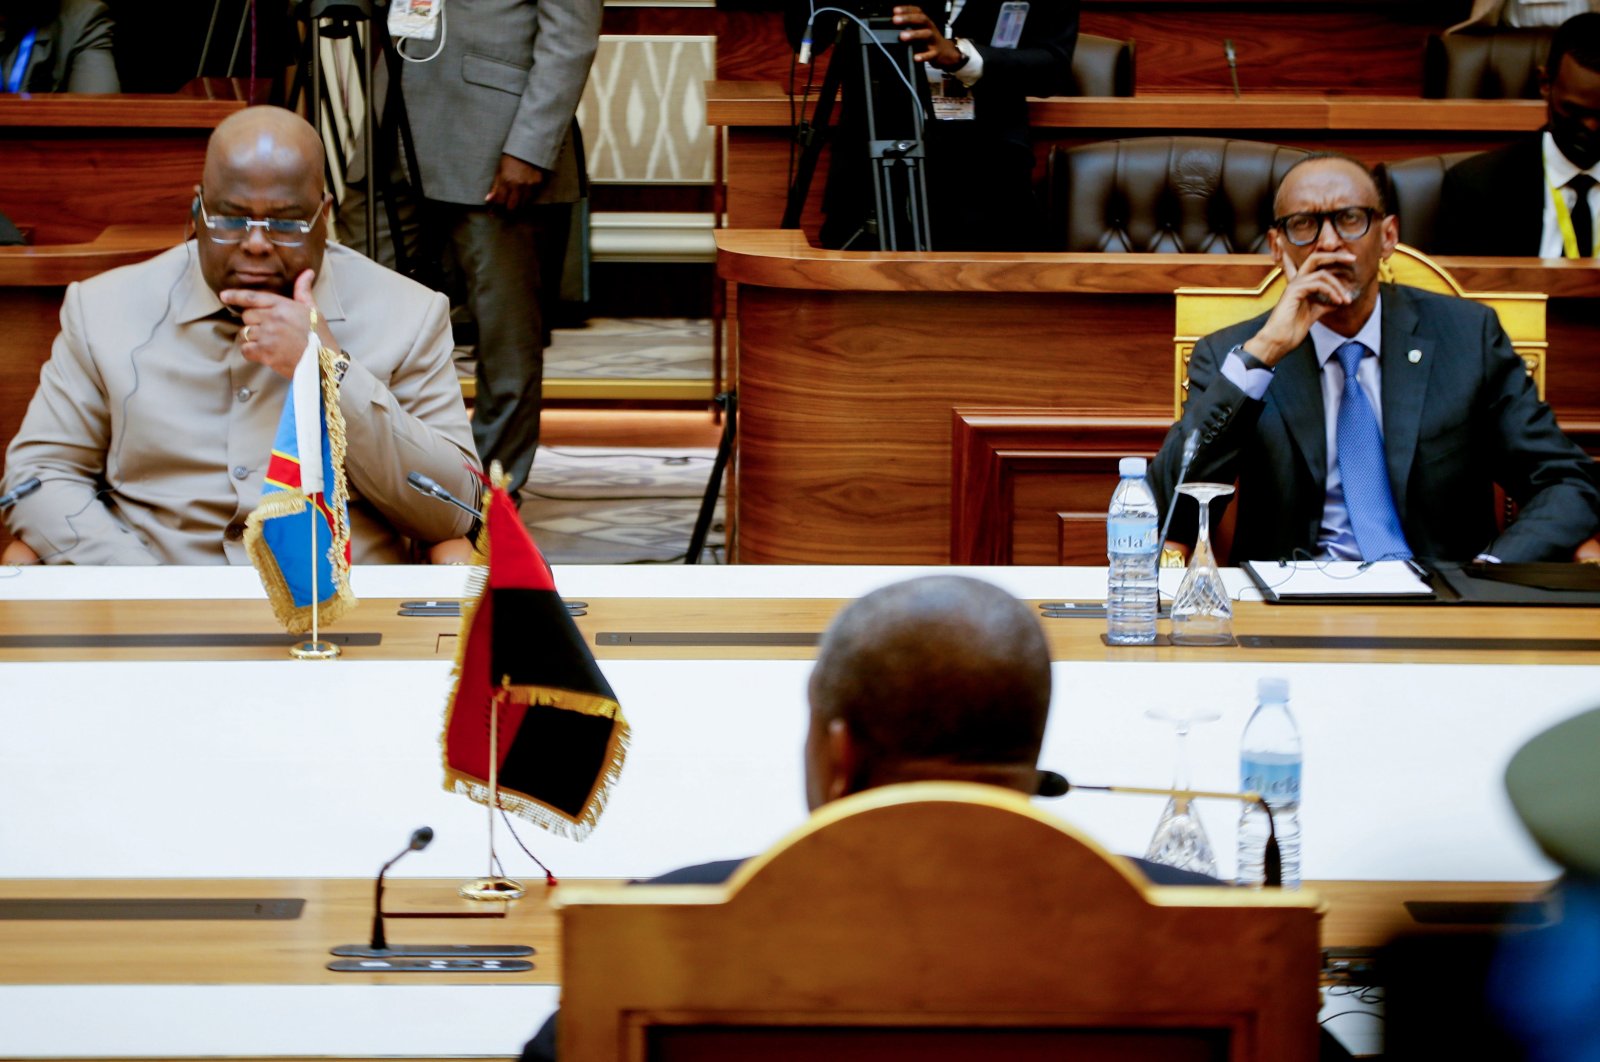 Congo, Rwanda agree to normalize diplomatic ties, fight M23 rebels